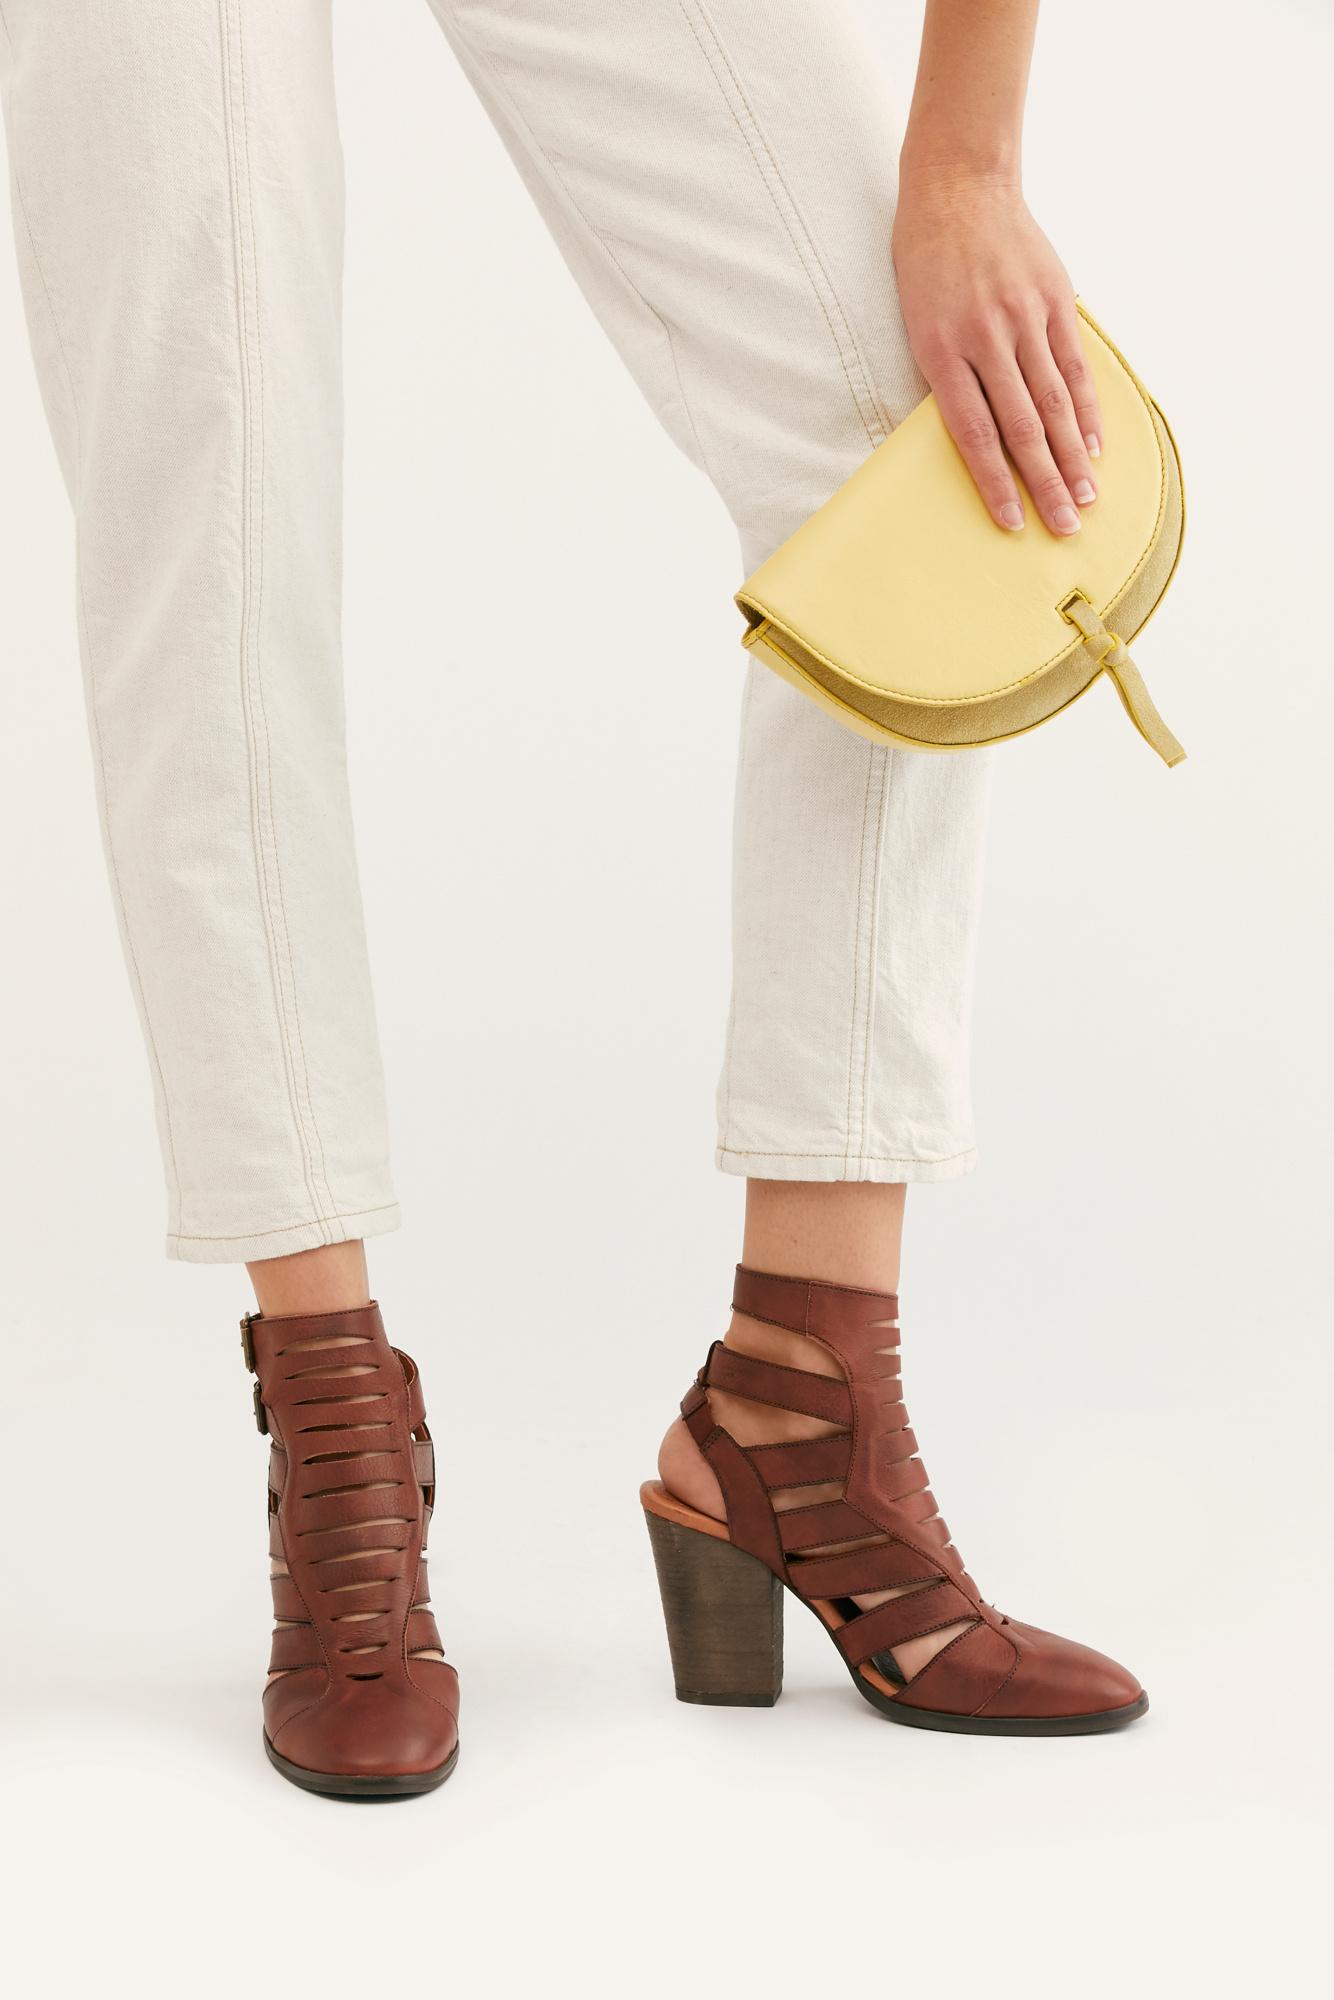 Free People, Shoes